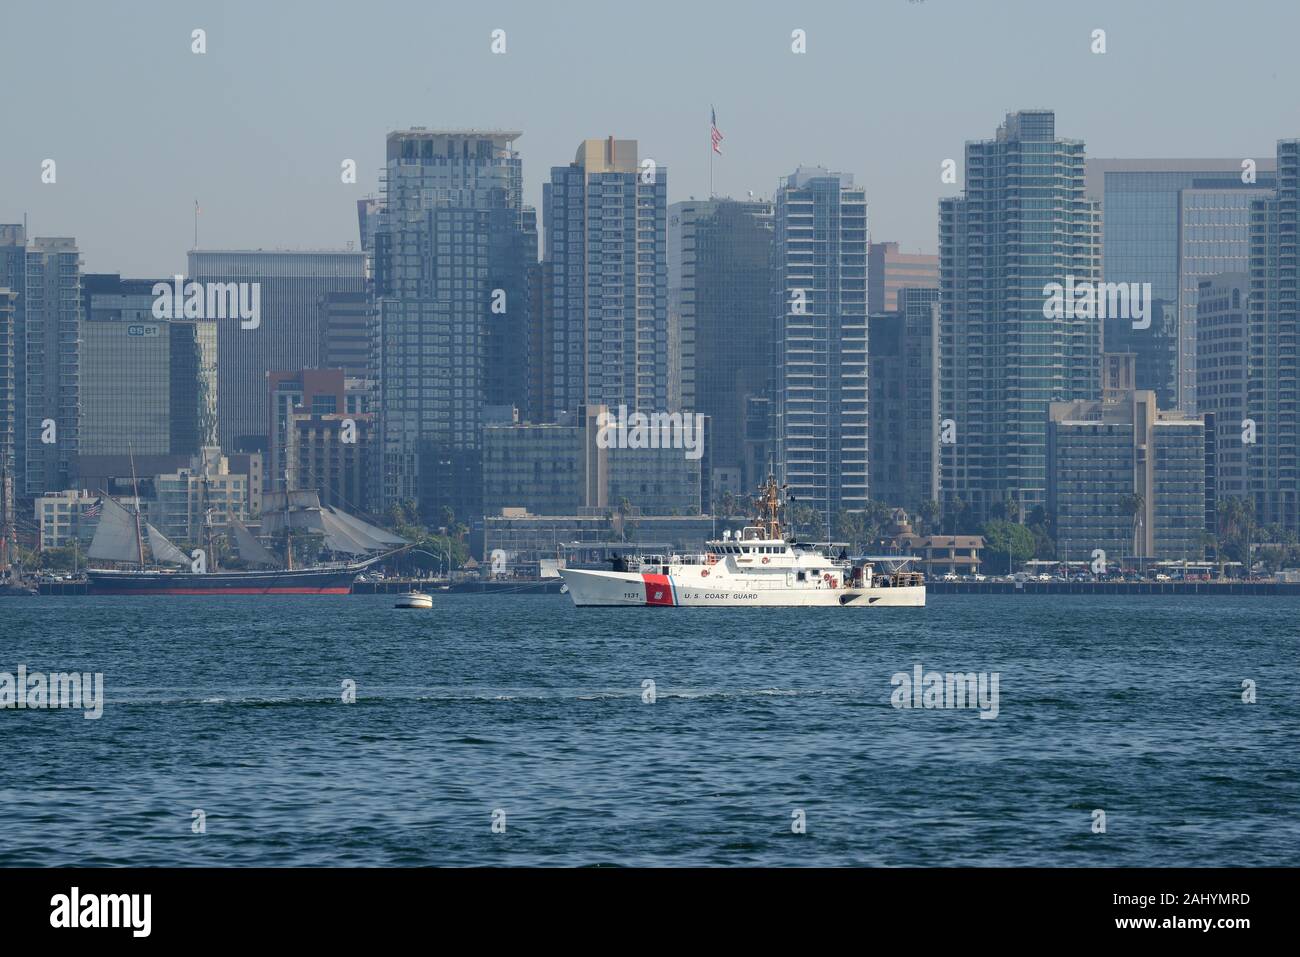 The San Pedro, California-based Coast Guard Cutter Terrell Horne (WPC 1131) is moored following a joint training exercise off the coast of San Diego, Nov. 5, 2019. Coast Guard Maritime Security Response Team West personnel led a visit, board, search and seizure exercise and included teams from MSRT West, Pacific Tactical Law Enforcement Team, MSST LA/LB, National Strike Force’s Pacific Strike Team and the Coast Guard Cutter Terrell Horne who participated in the training scenarios over the course of two days. U.S. Coast Guard photo by Petty Officer 1st Class Matthew S. Masaschi Stock Photo